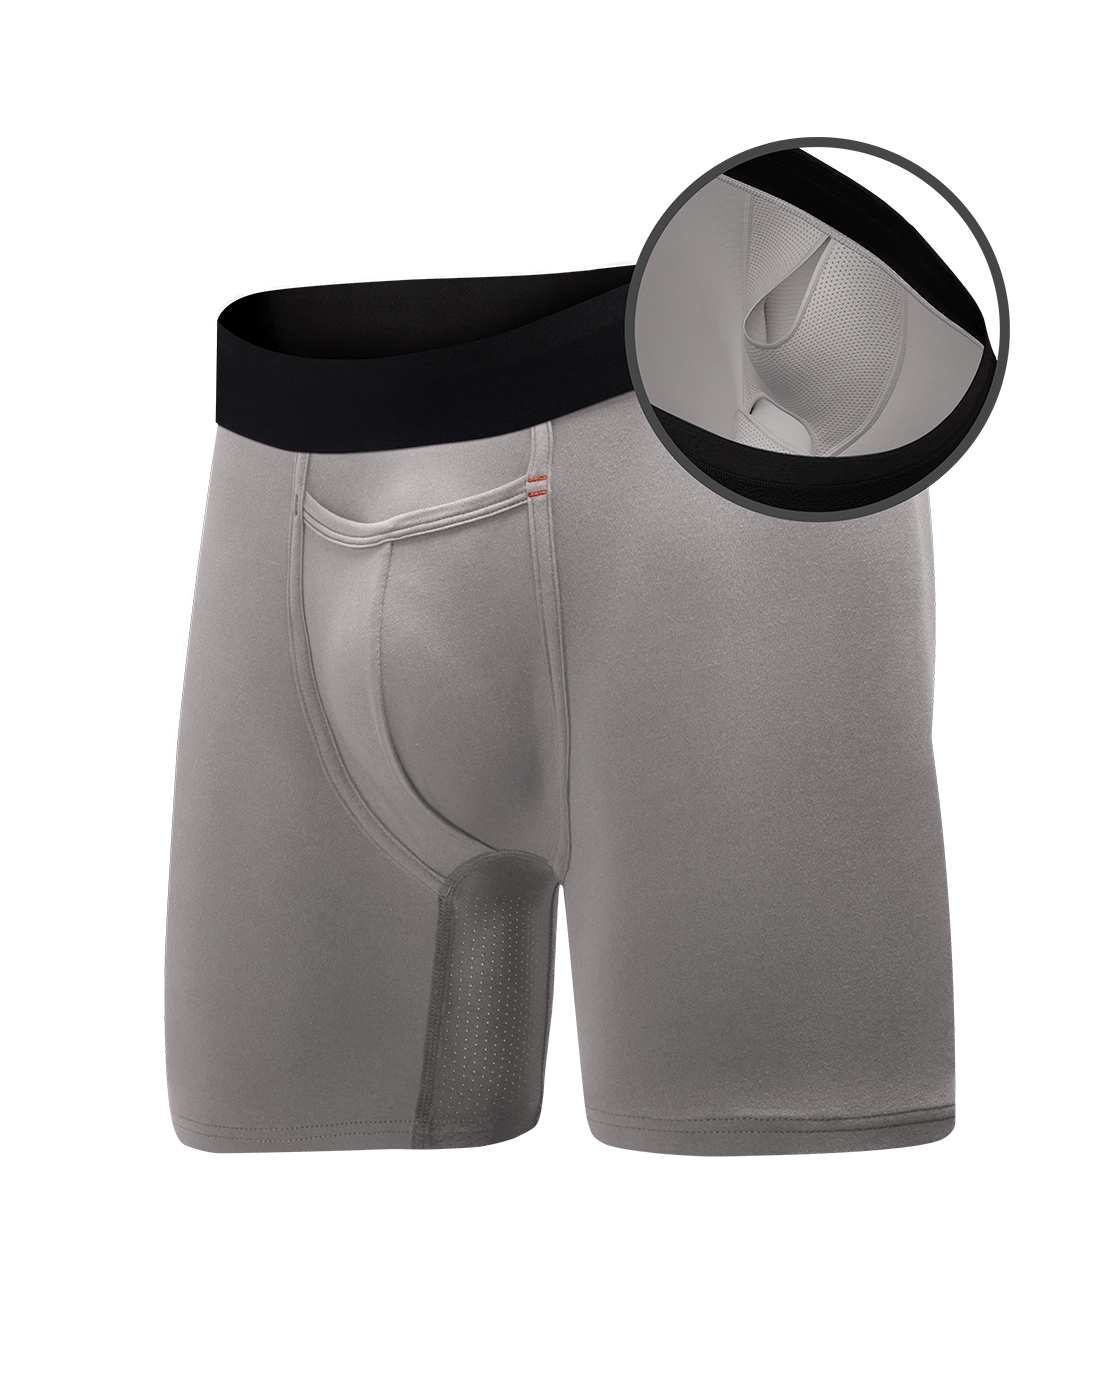 Paradis Sport: Underwear for Athletes that stays in place